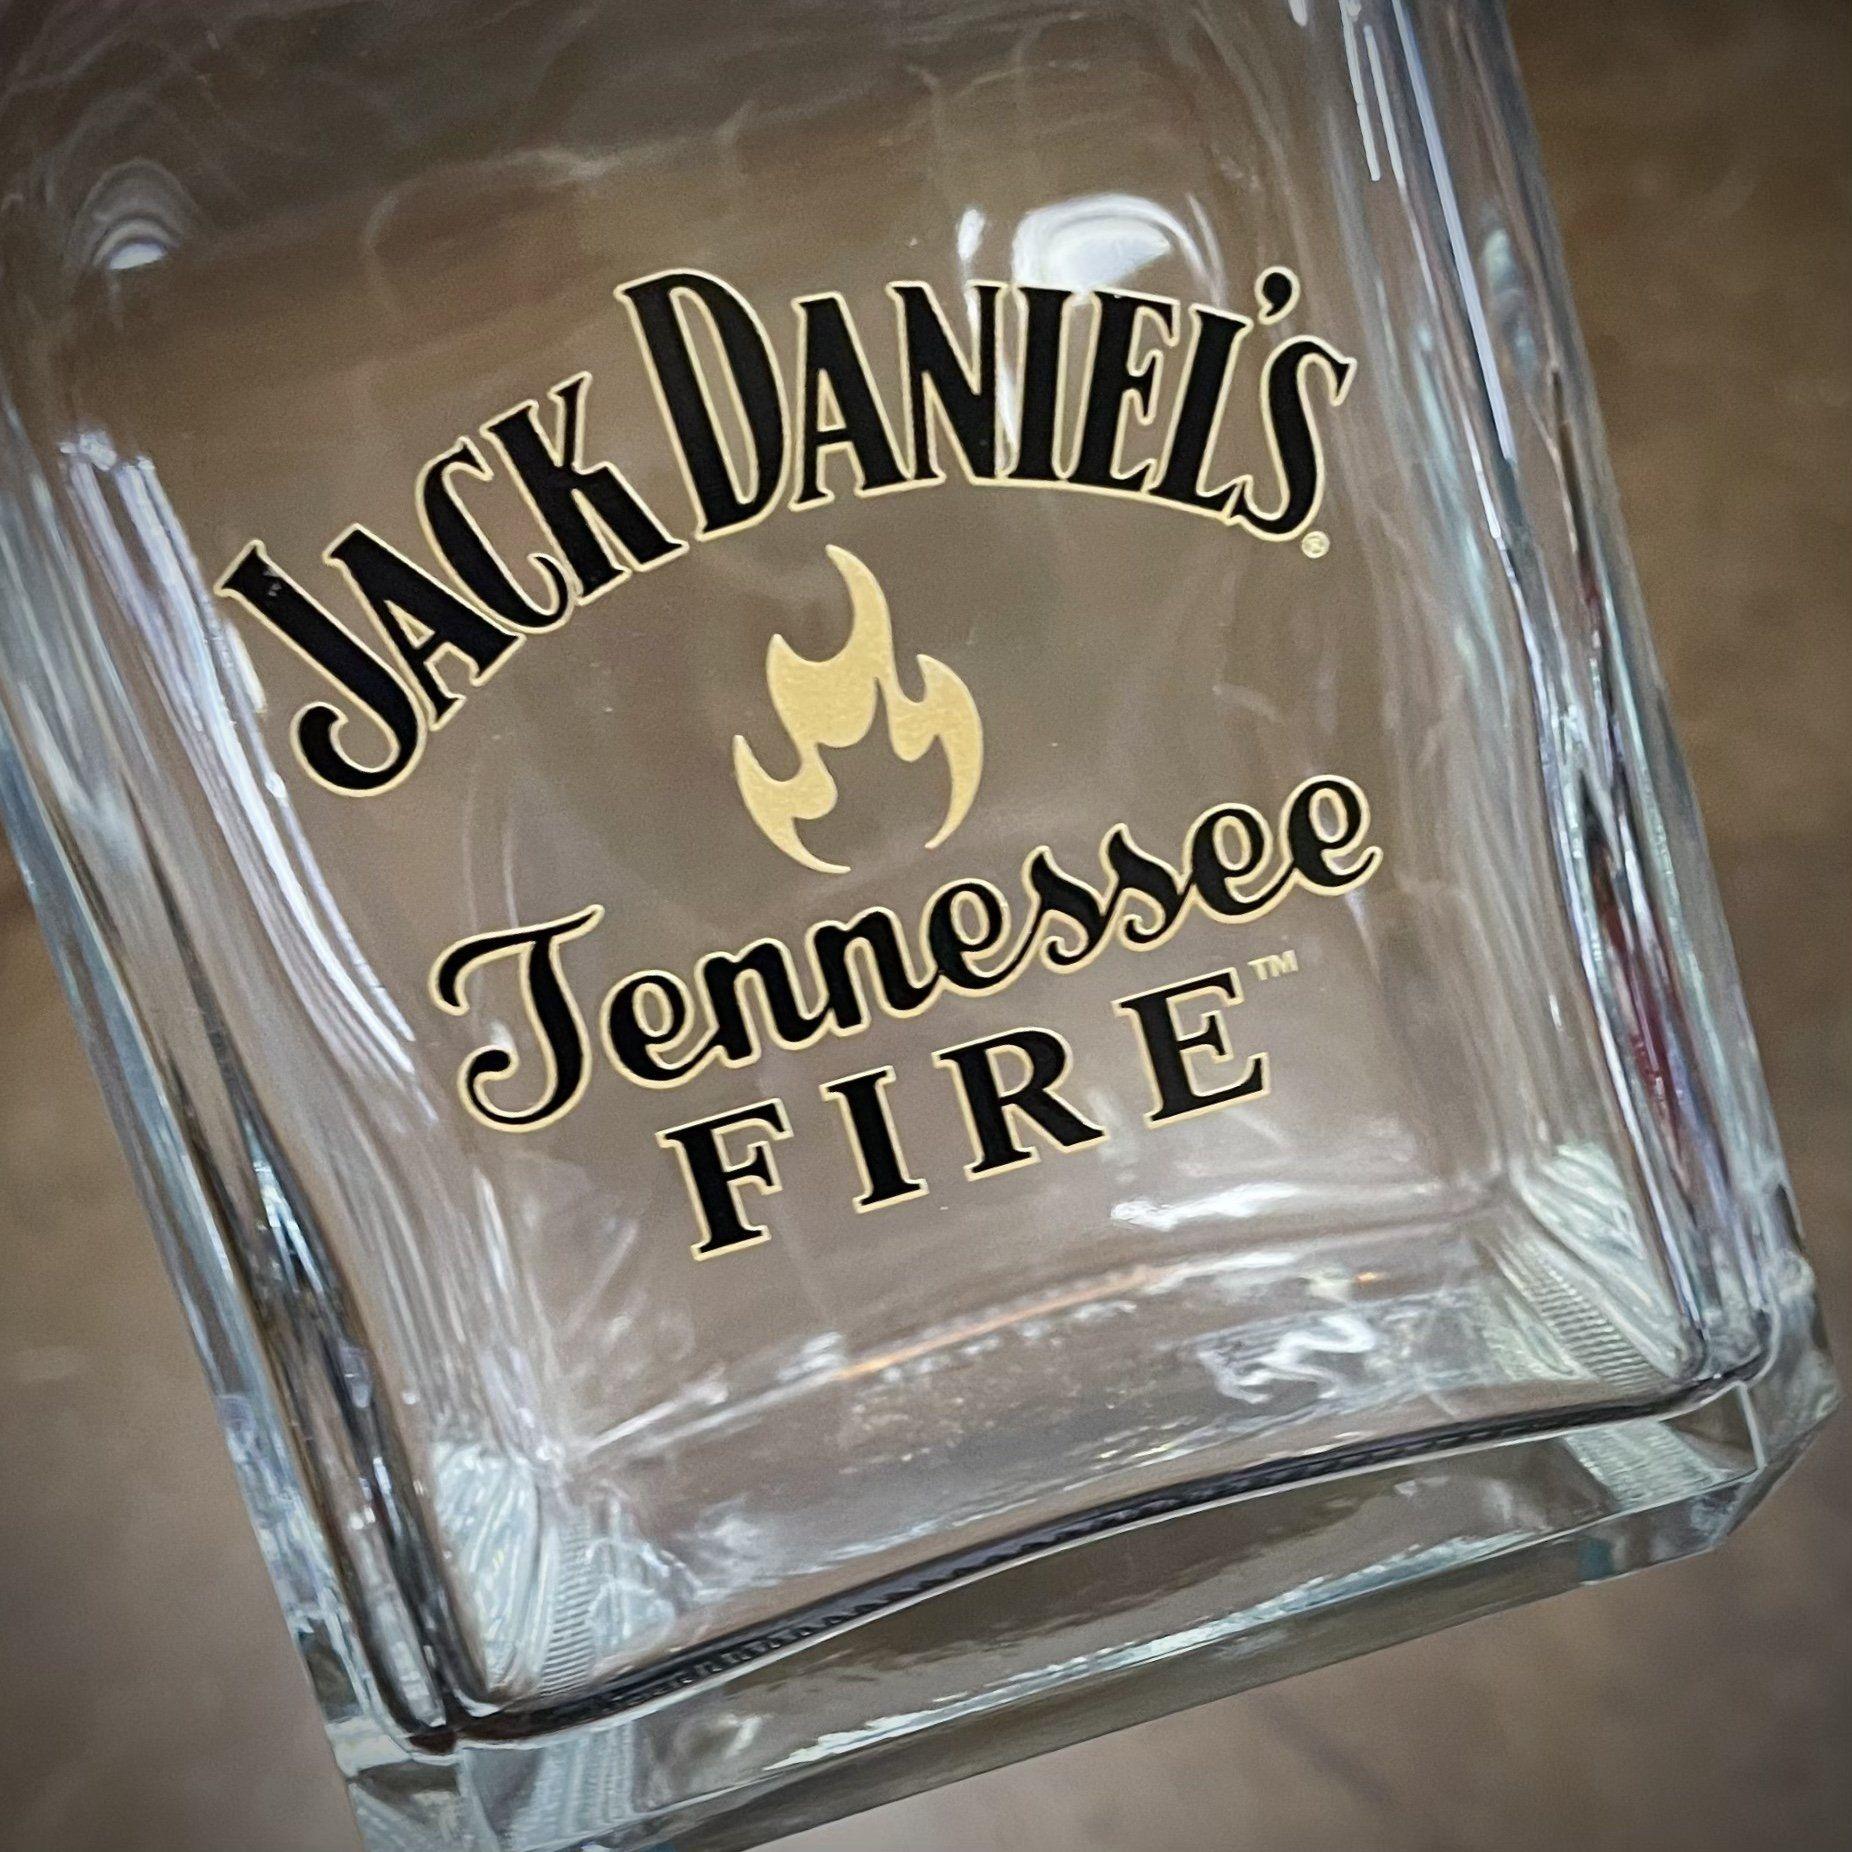 Jack Daniels Tennessee Fire Decanter - The Whiskey Cave